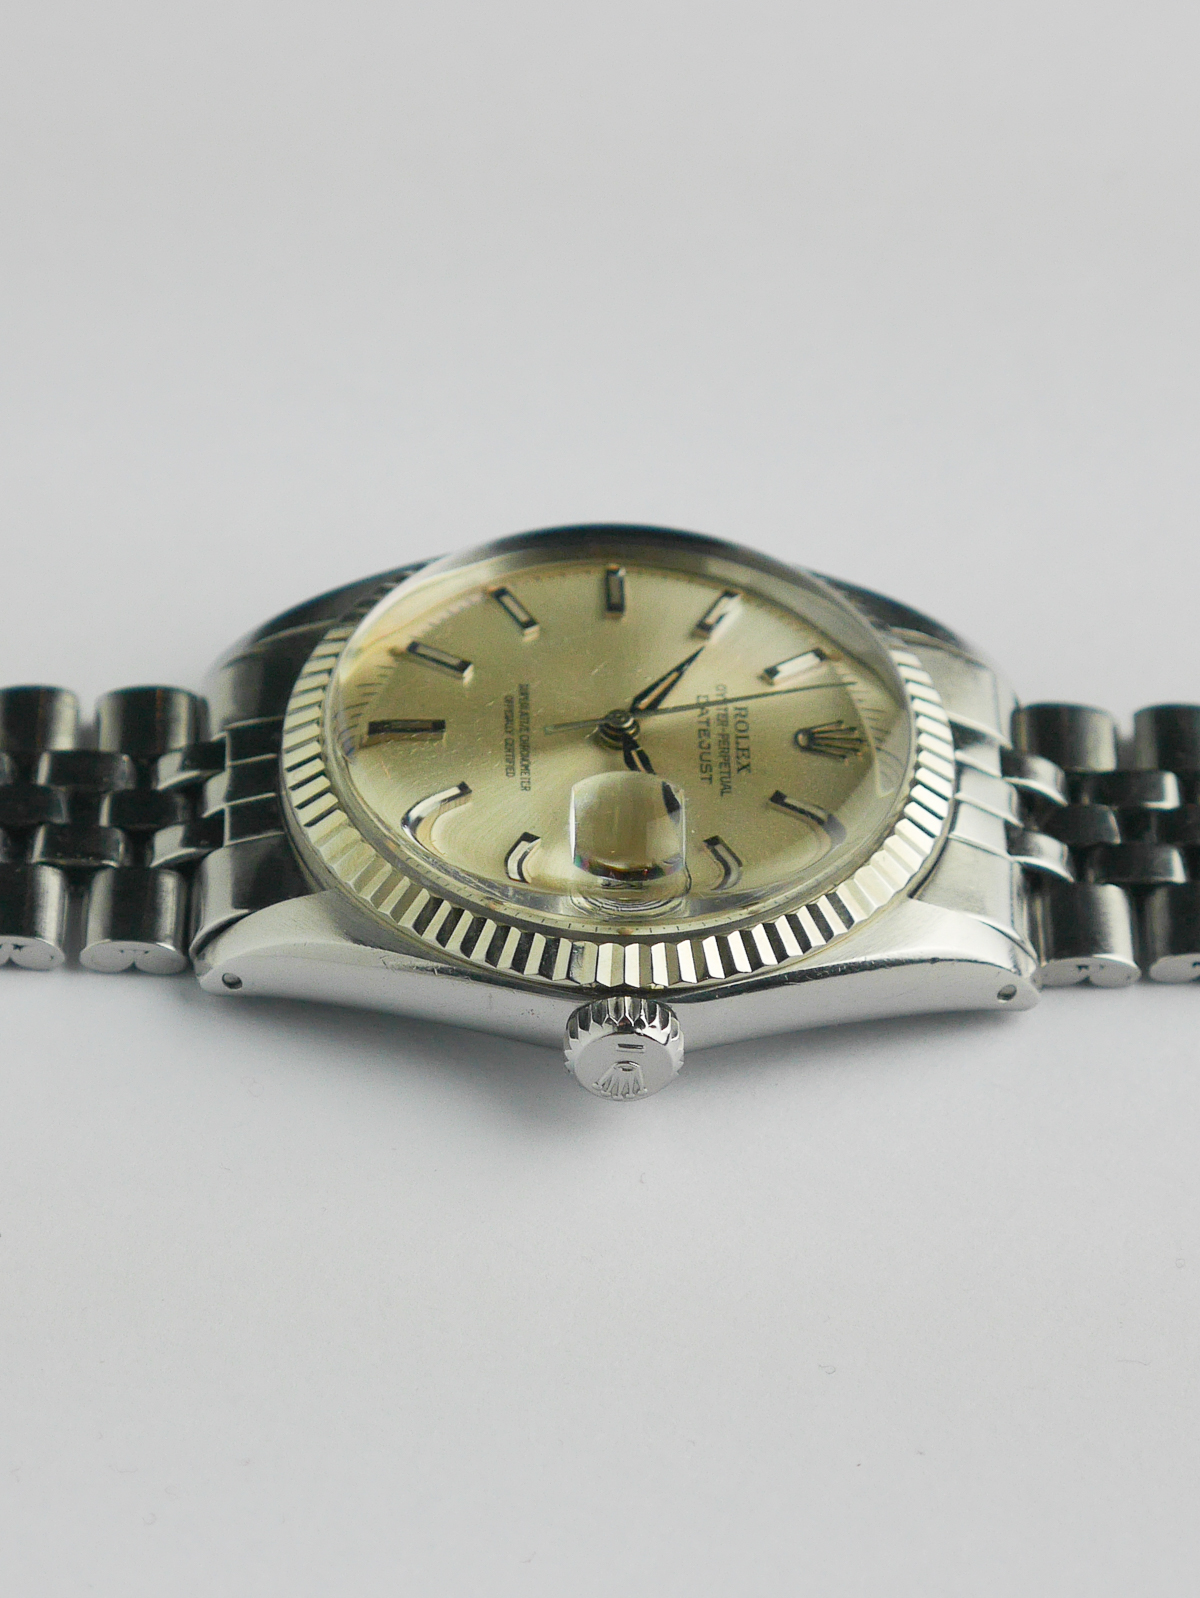 rolex oyster perpetual datejust 36mm price